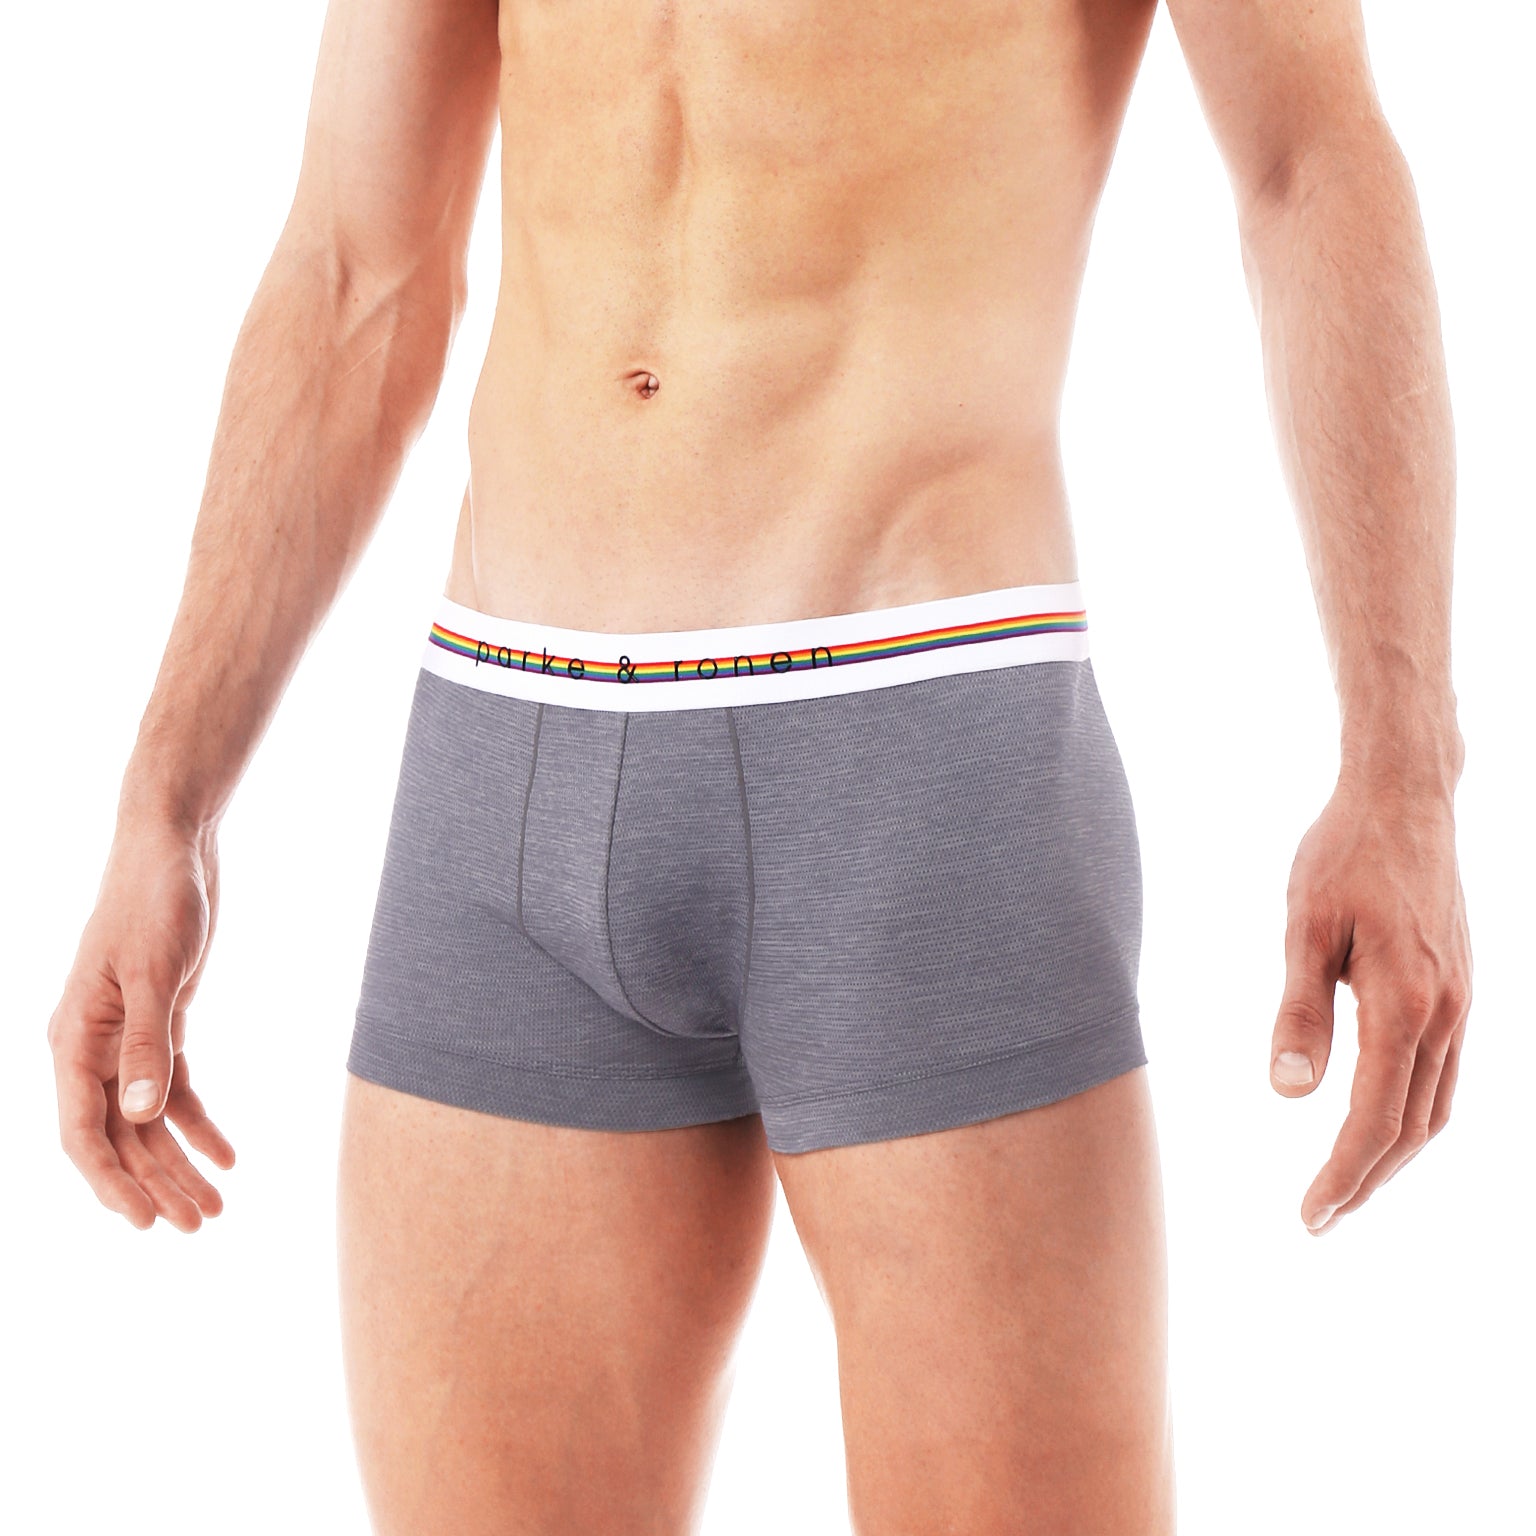 LIMITED PRIDE EDITION- Dove Grey Heather Mesh Low Rise Trunk